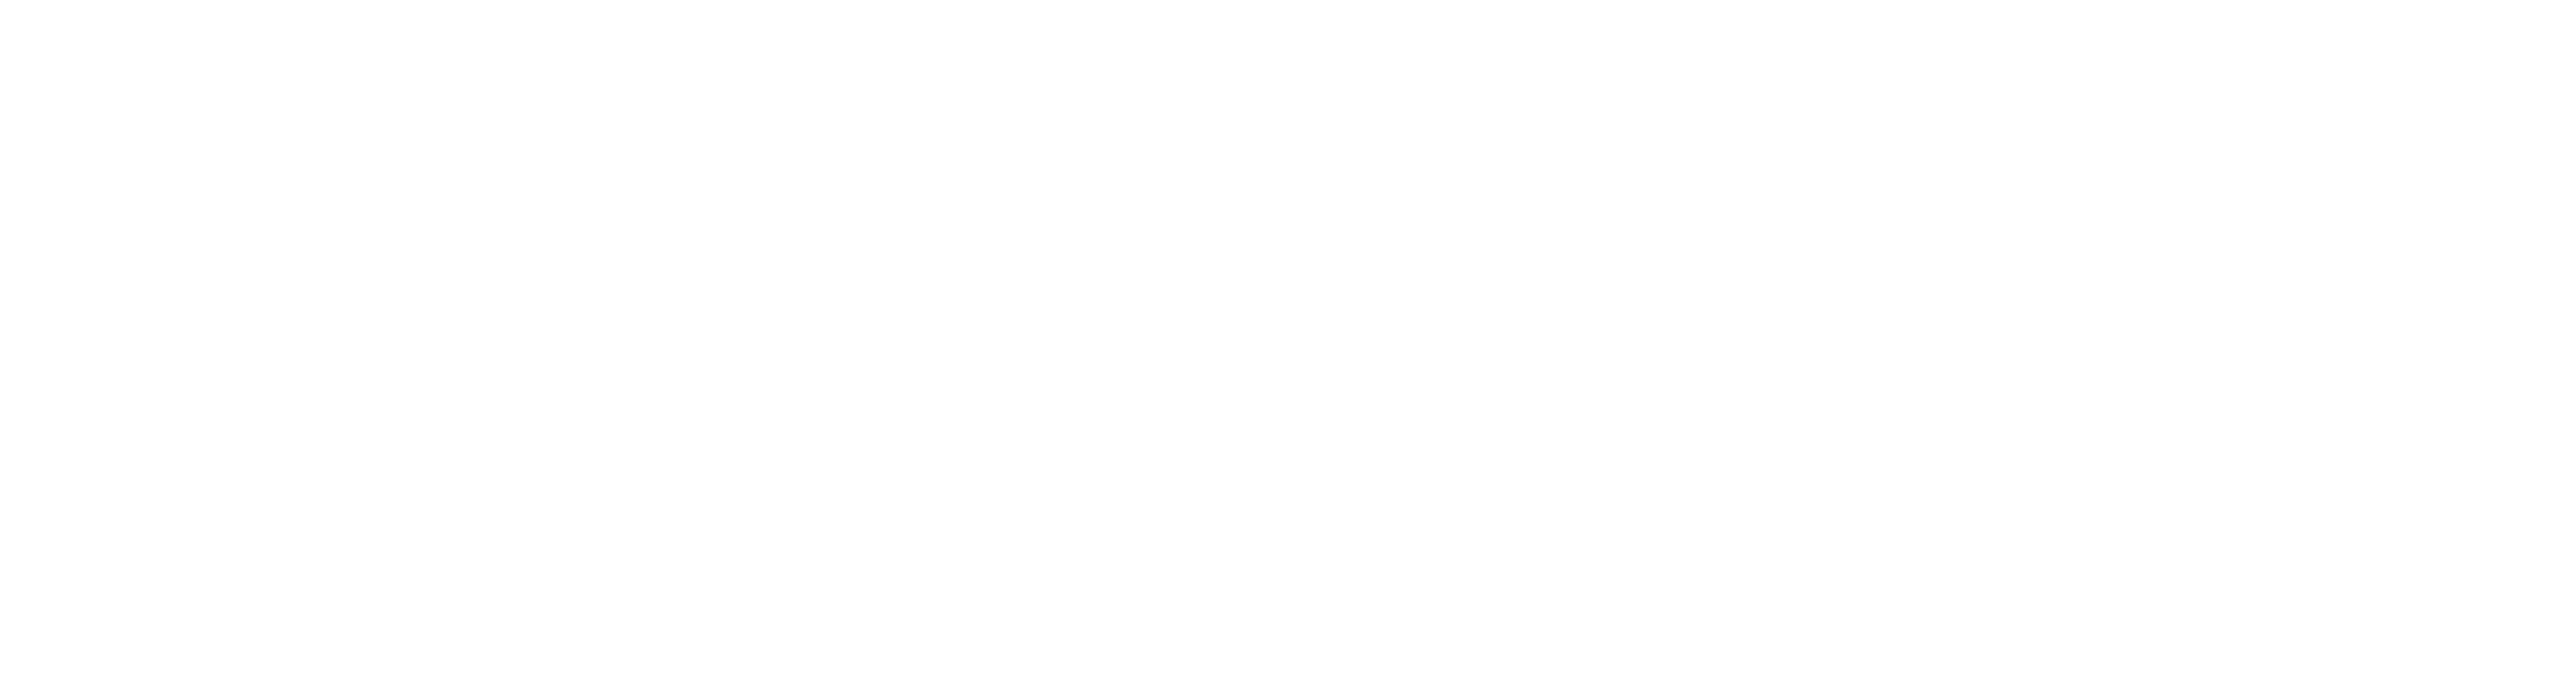 The Electric Logo - Summit Electric Supply › Wholesale Electrical Supplies and Tools ...